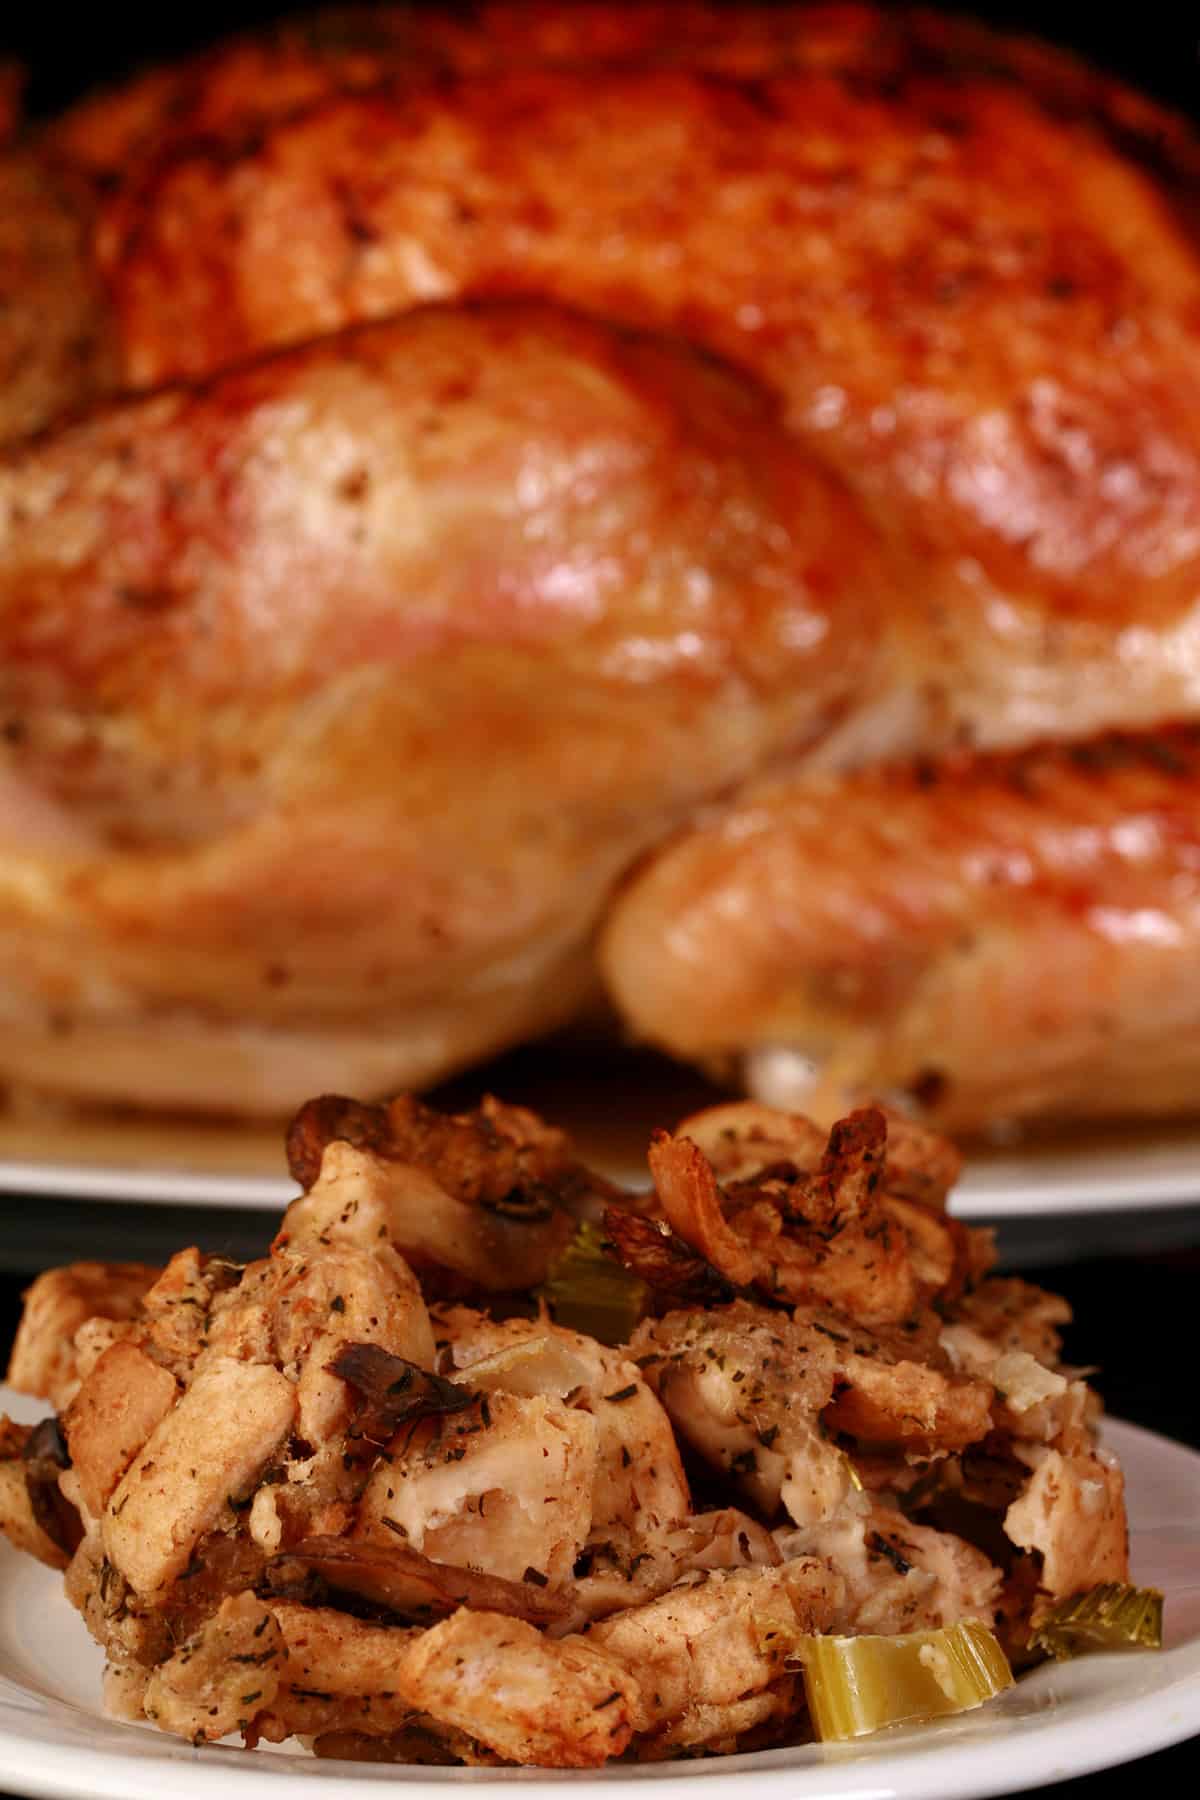 A plate of keto turkey stuffing in front of a roasted turkey.